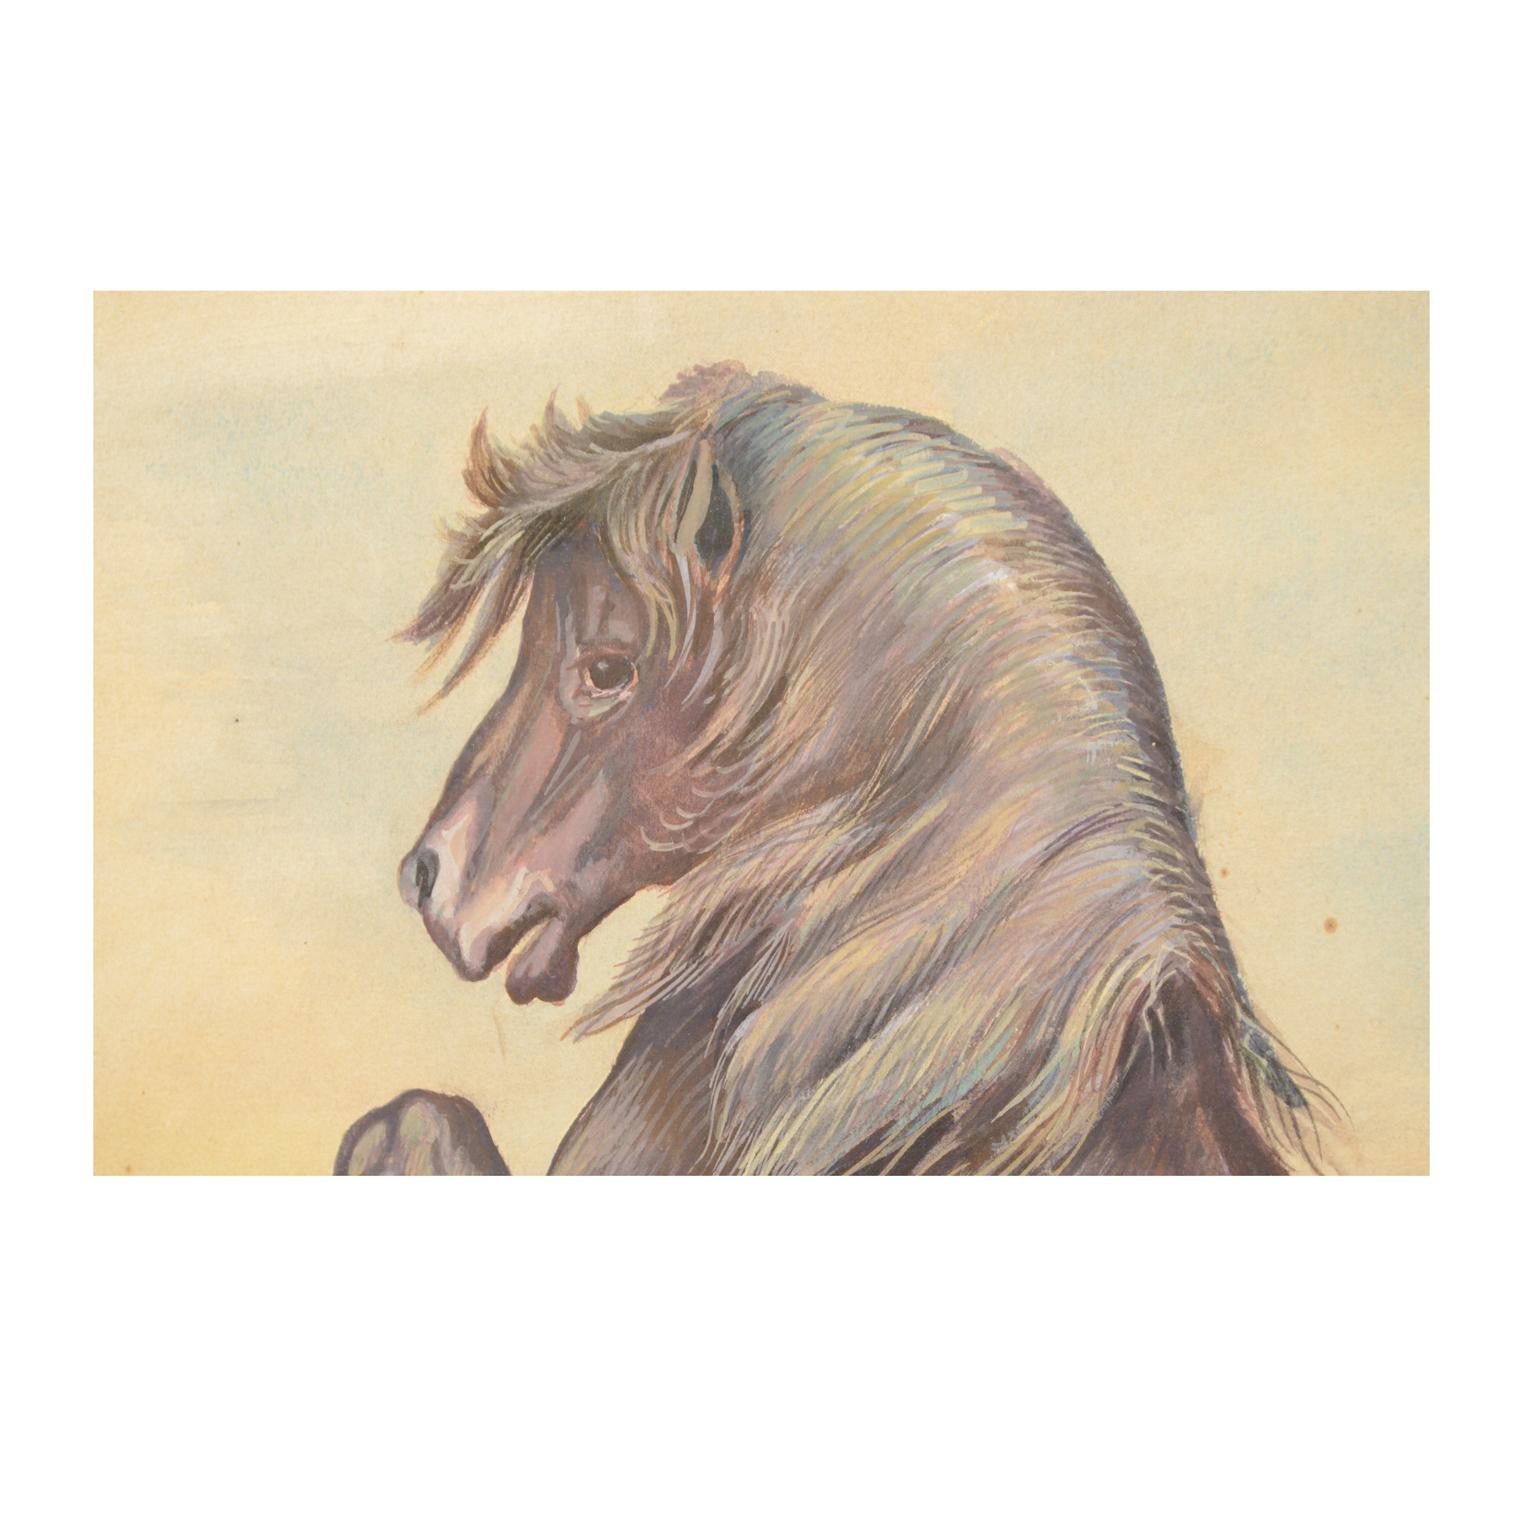 Korean Sketch of a Pony Korea 1970s Acrylic on Paper for an Animals Encyclopedia For Sale